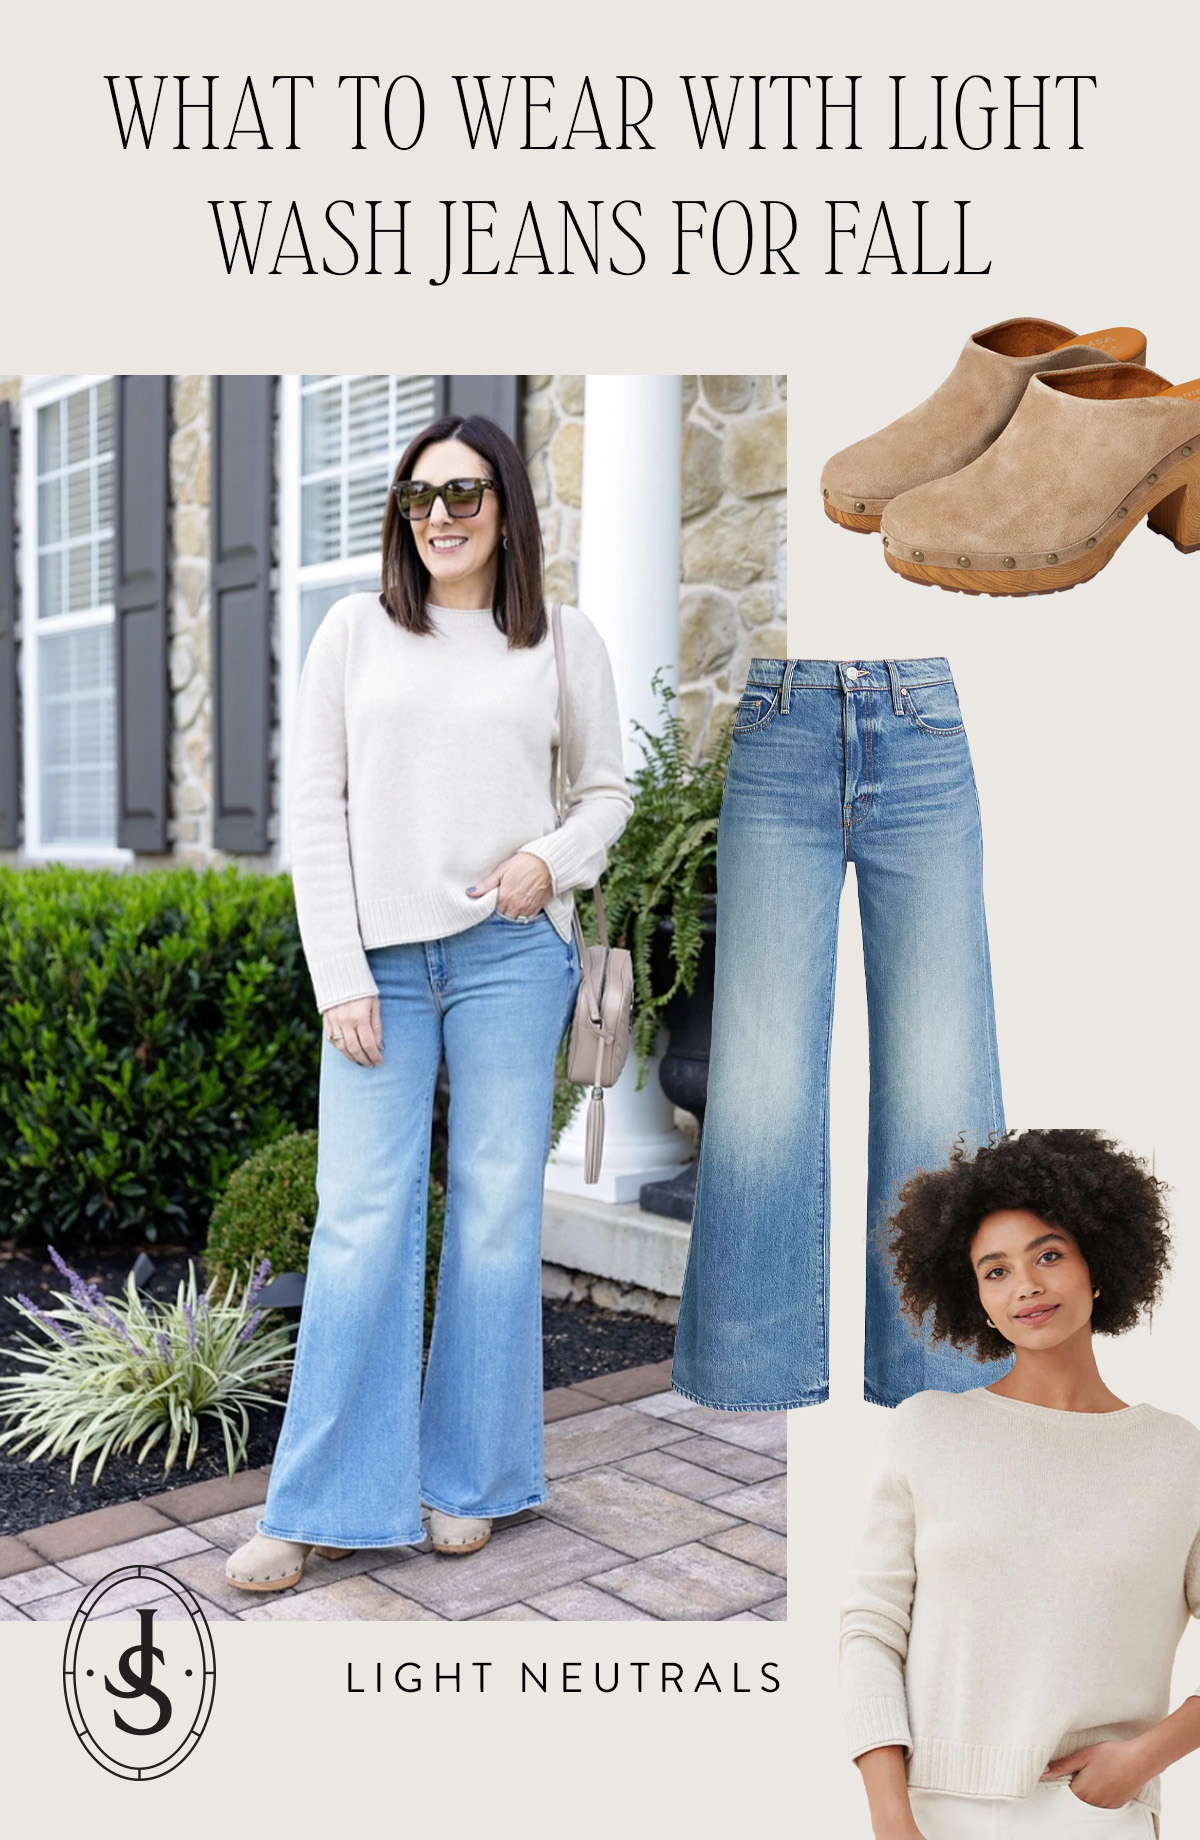 What to Wear with Light Wash Jeans for Fall: Light Neutrals